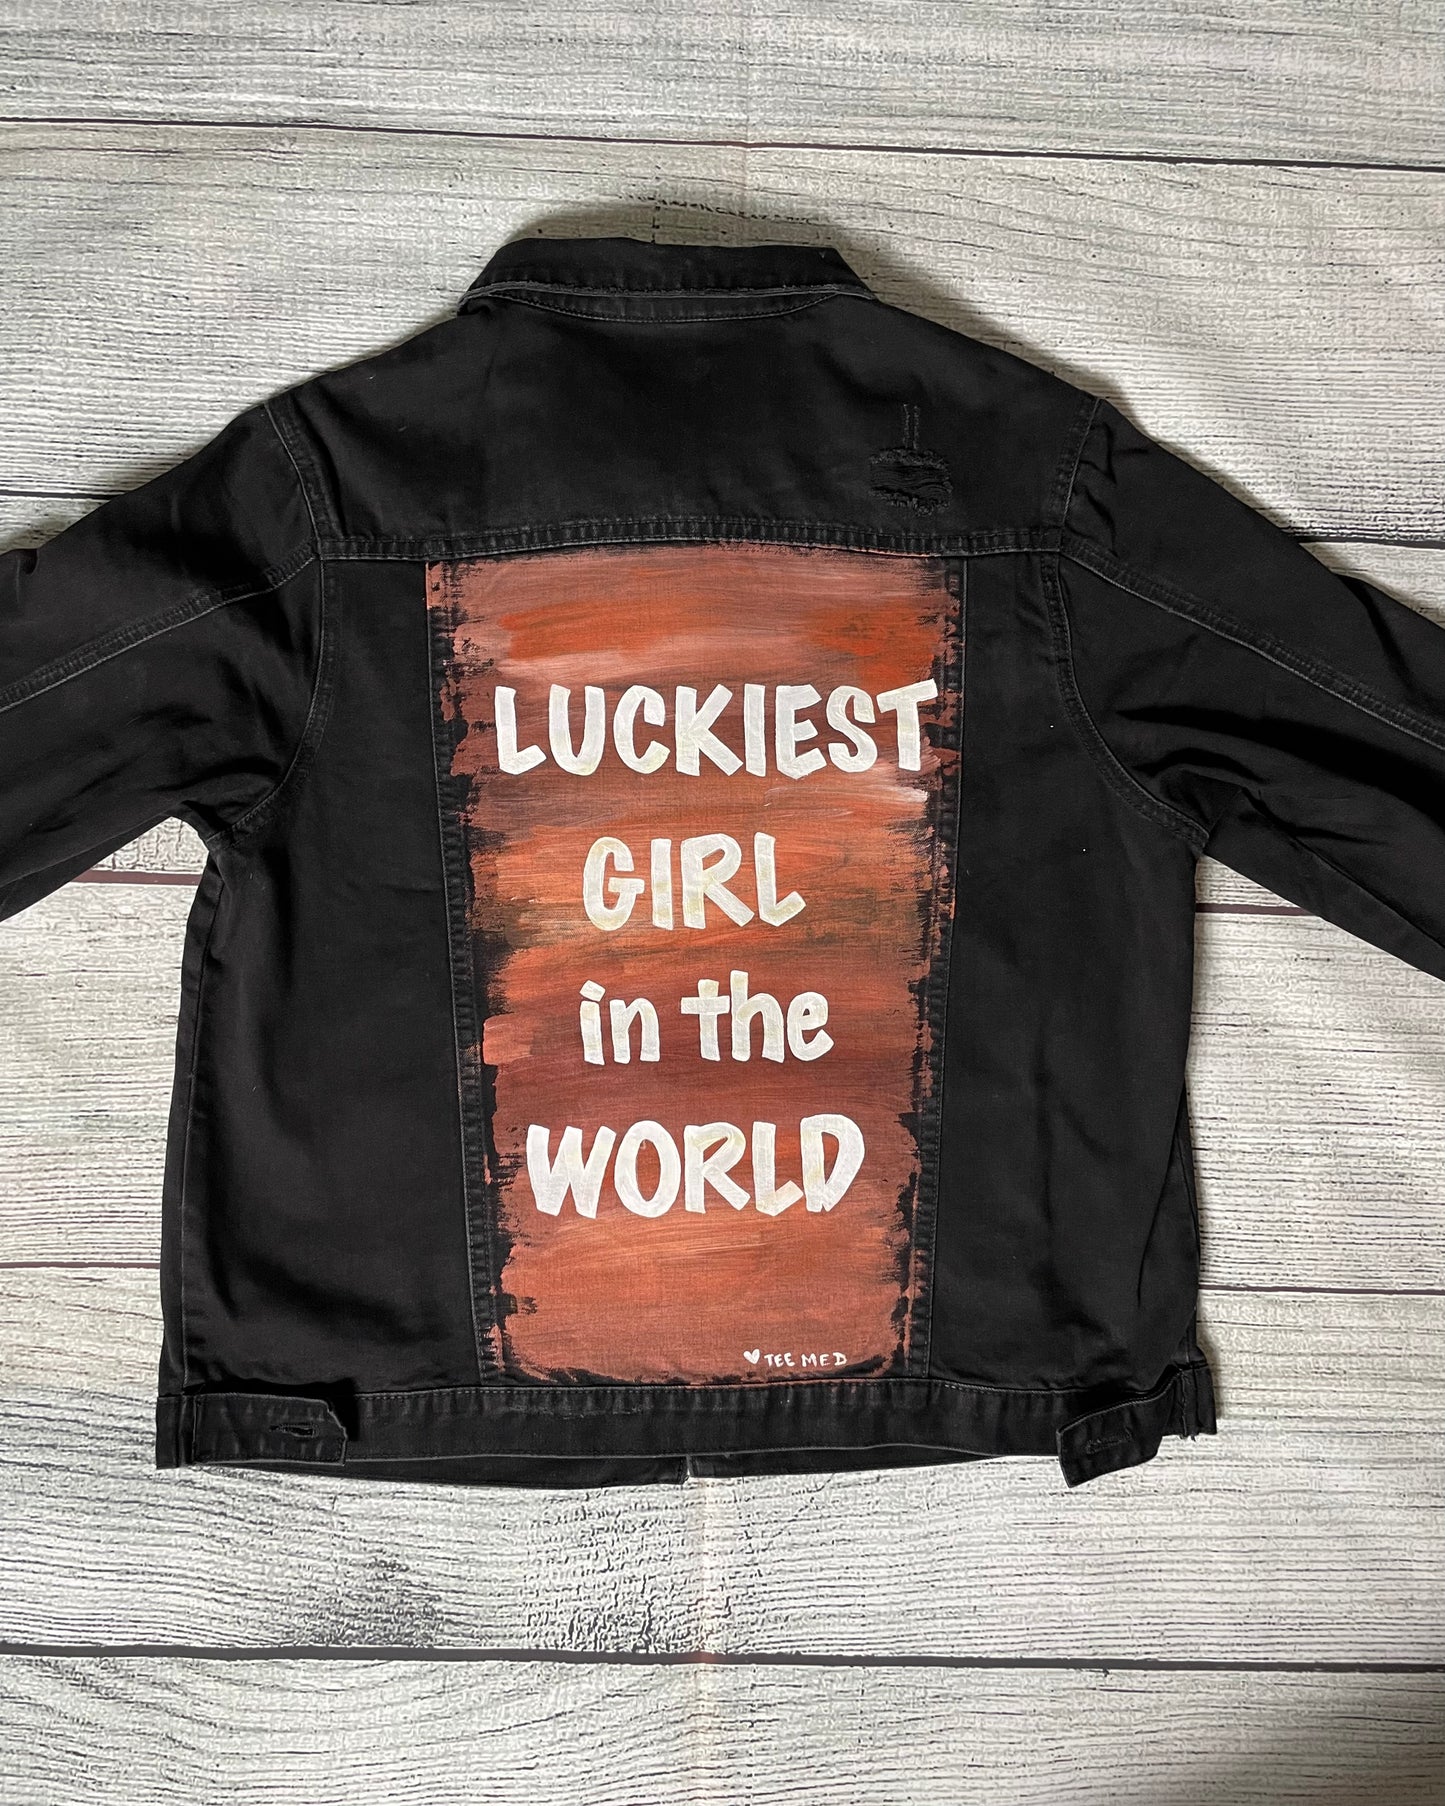 LUCKIEST GIRL -  Everything goes my way!